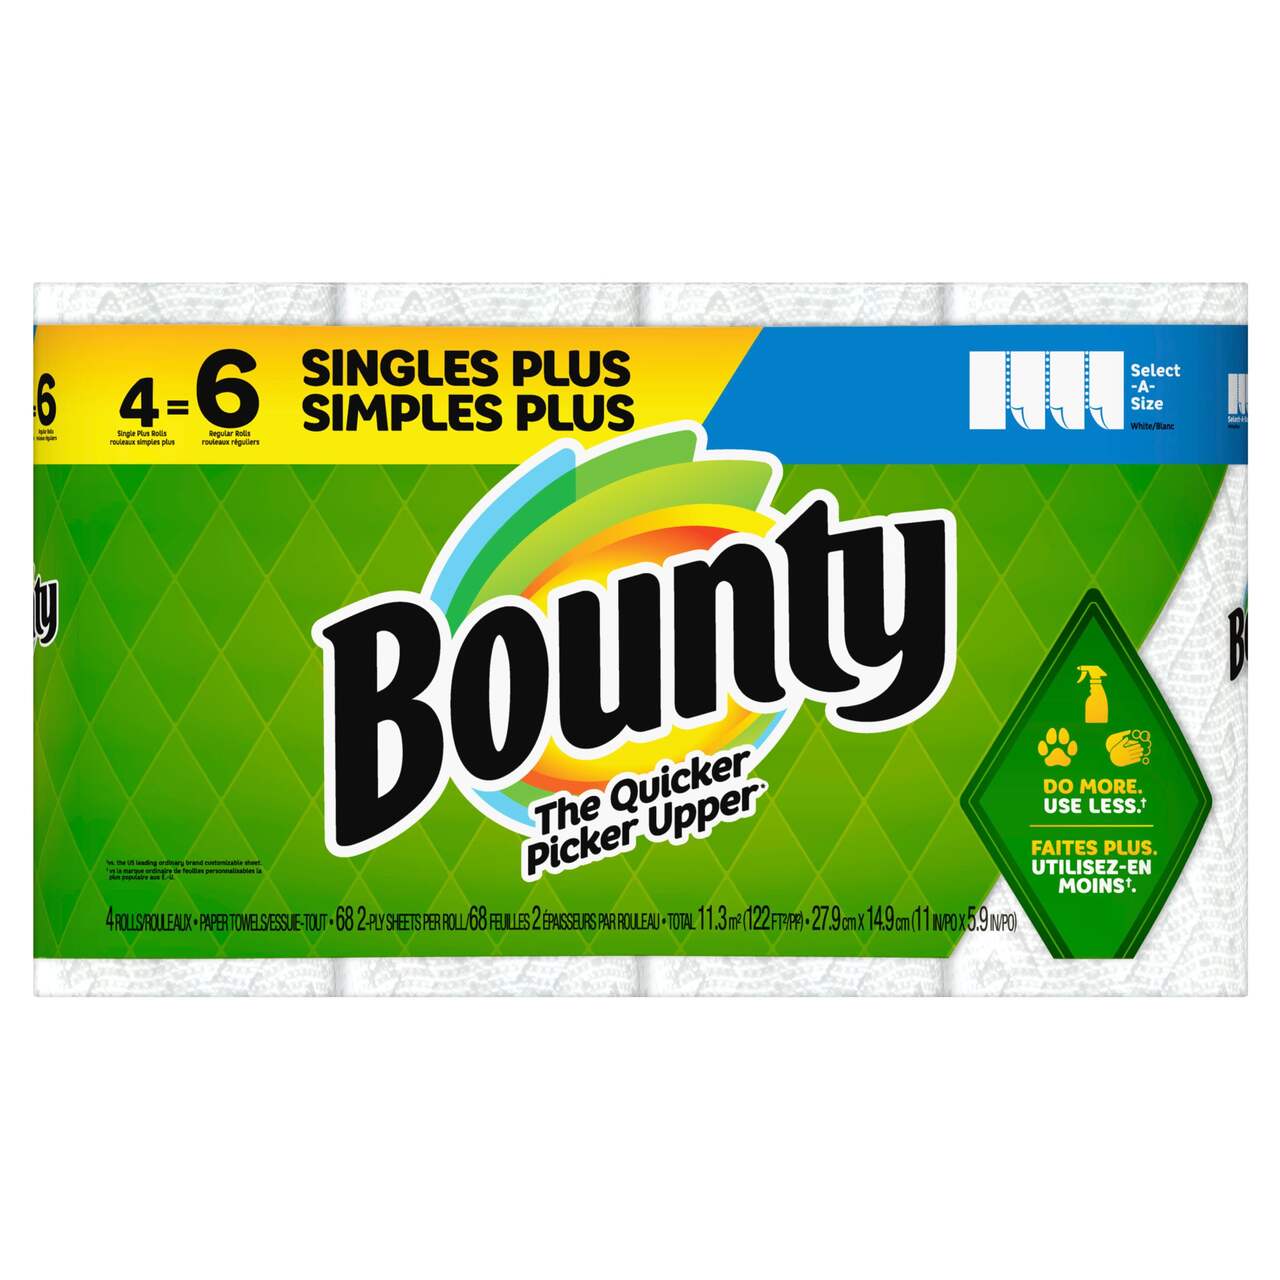 https://media-www.canadiantire.ca/product/living/home-essentials/household-consumables/0534300/bounty-paper-towel-select-a-size-singles-plus-4-6-rolls-761bfaed-a6b3-4ab1-ab70-4aa3e33e1898-jpgrendition.jpg?imdensity=1&imwidth=1244&impolicy=mZoom